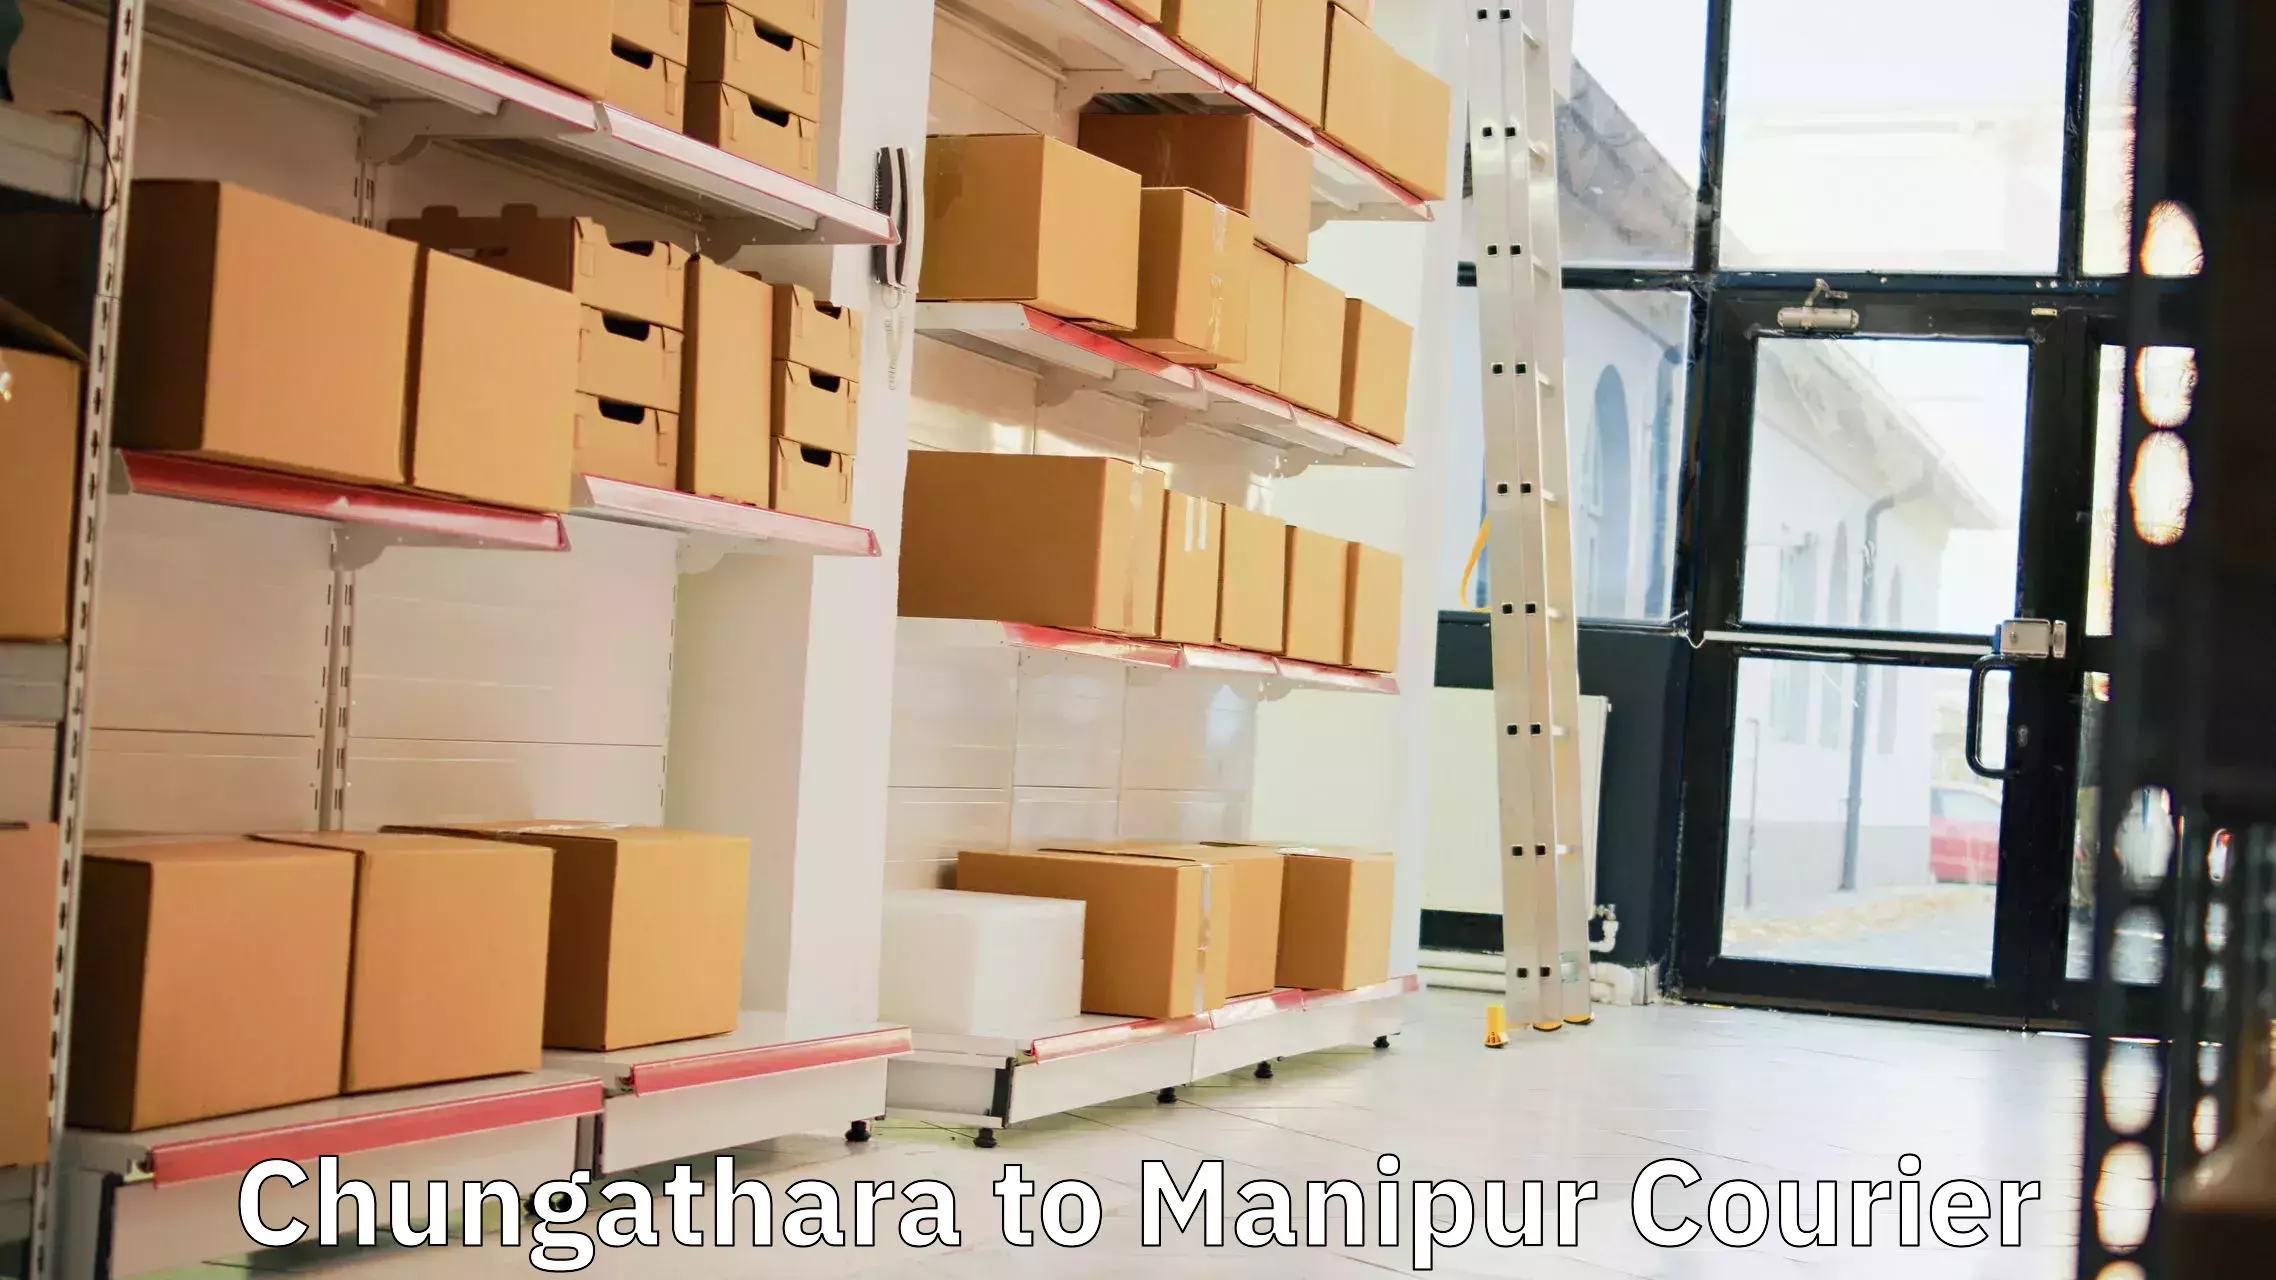 24-hour courier service in Chungathara to Chandel